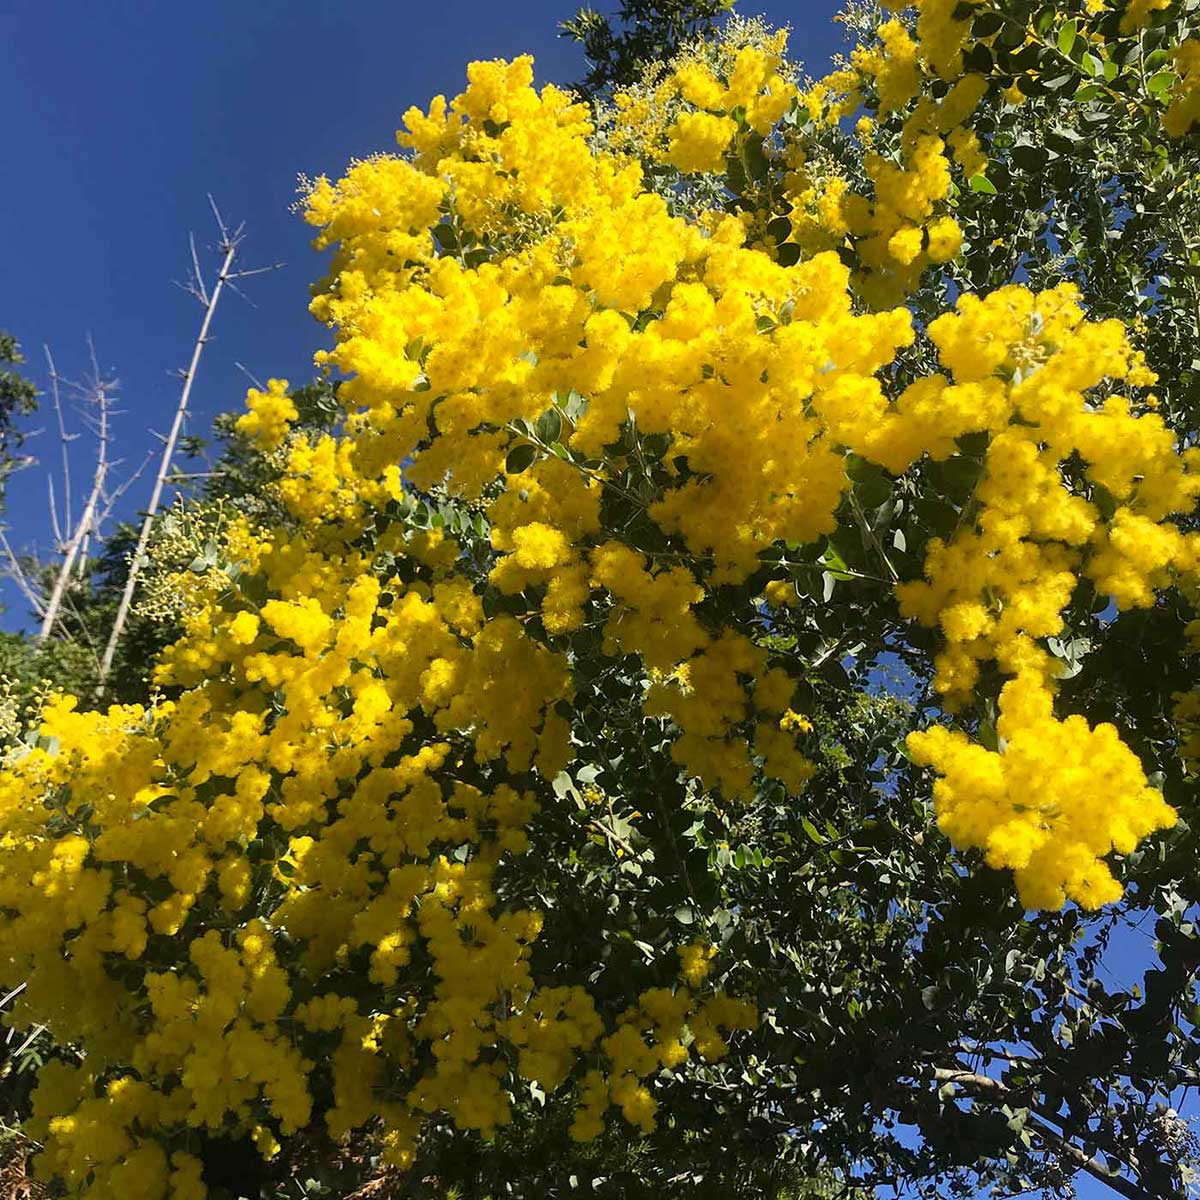 Wattle tree. - click to view larger image